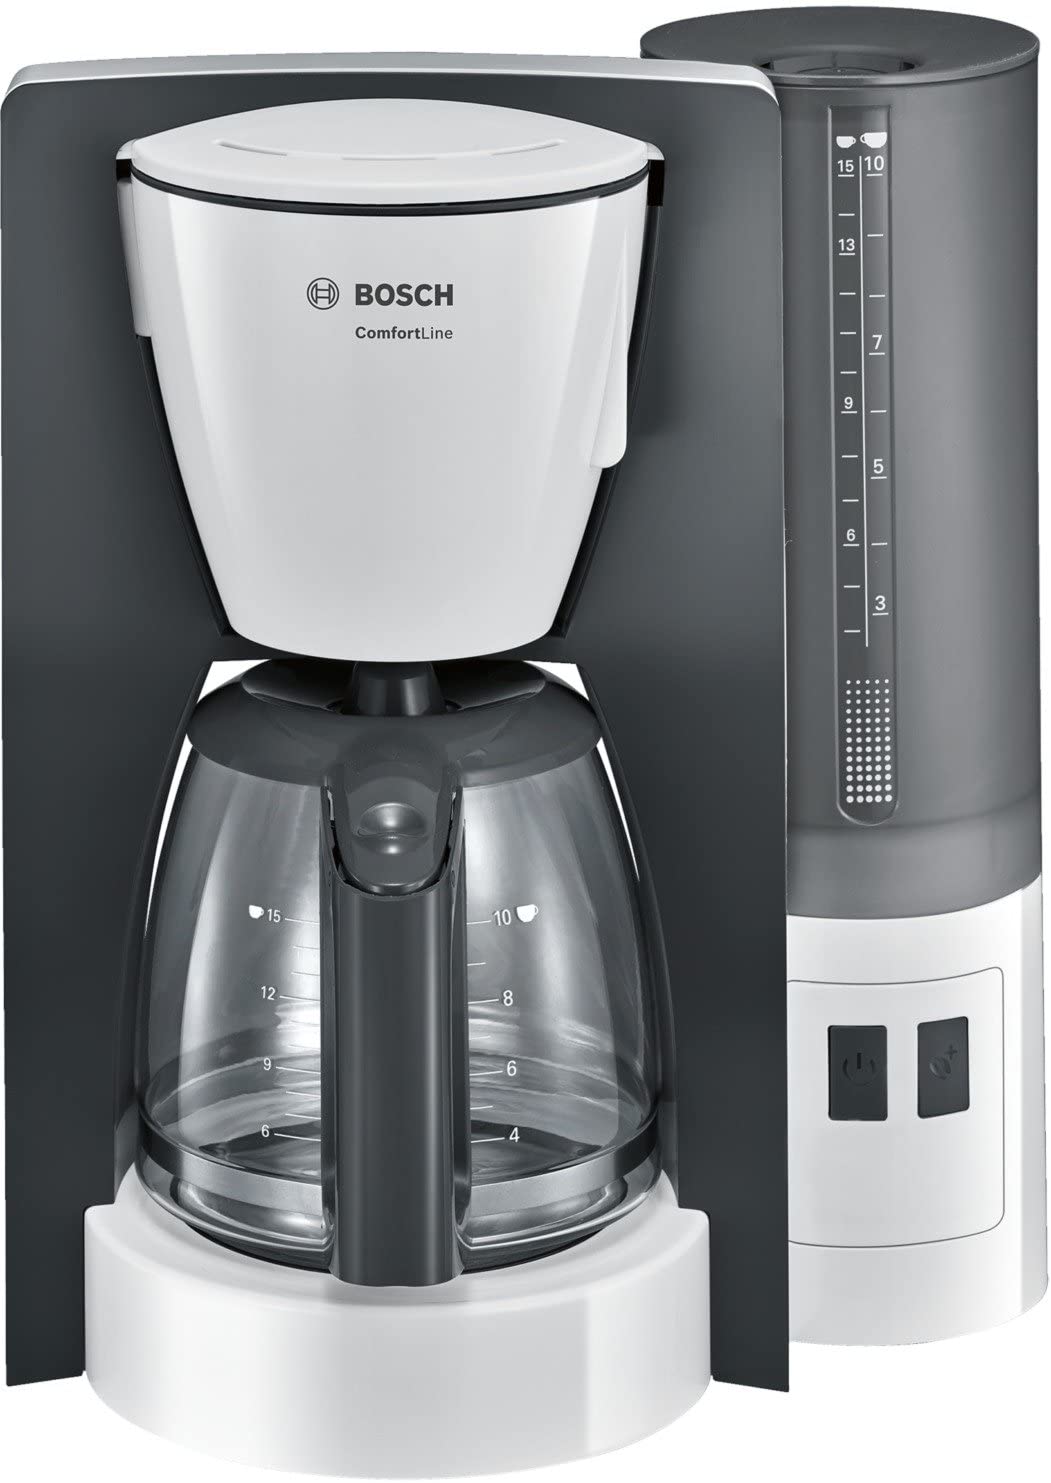 Bosch ComfortLine TKA6A041 Filter Coffee Machine, Aroma+, Aroma Protection Glass Jug 1.25 L, for 10-15 Cups, Removable Water Tank, Drip Stop, Swivelling Filter Carrier, Cable Storage, 1200 W, W, White